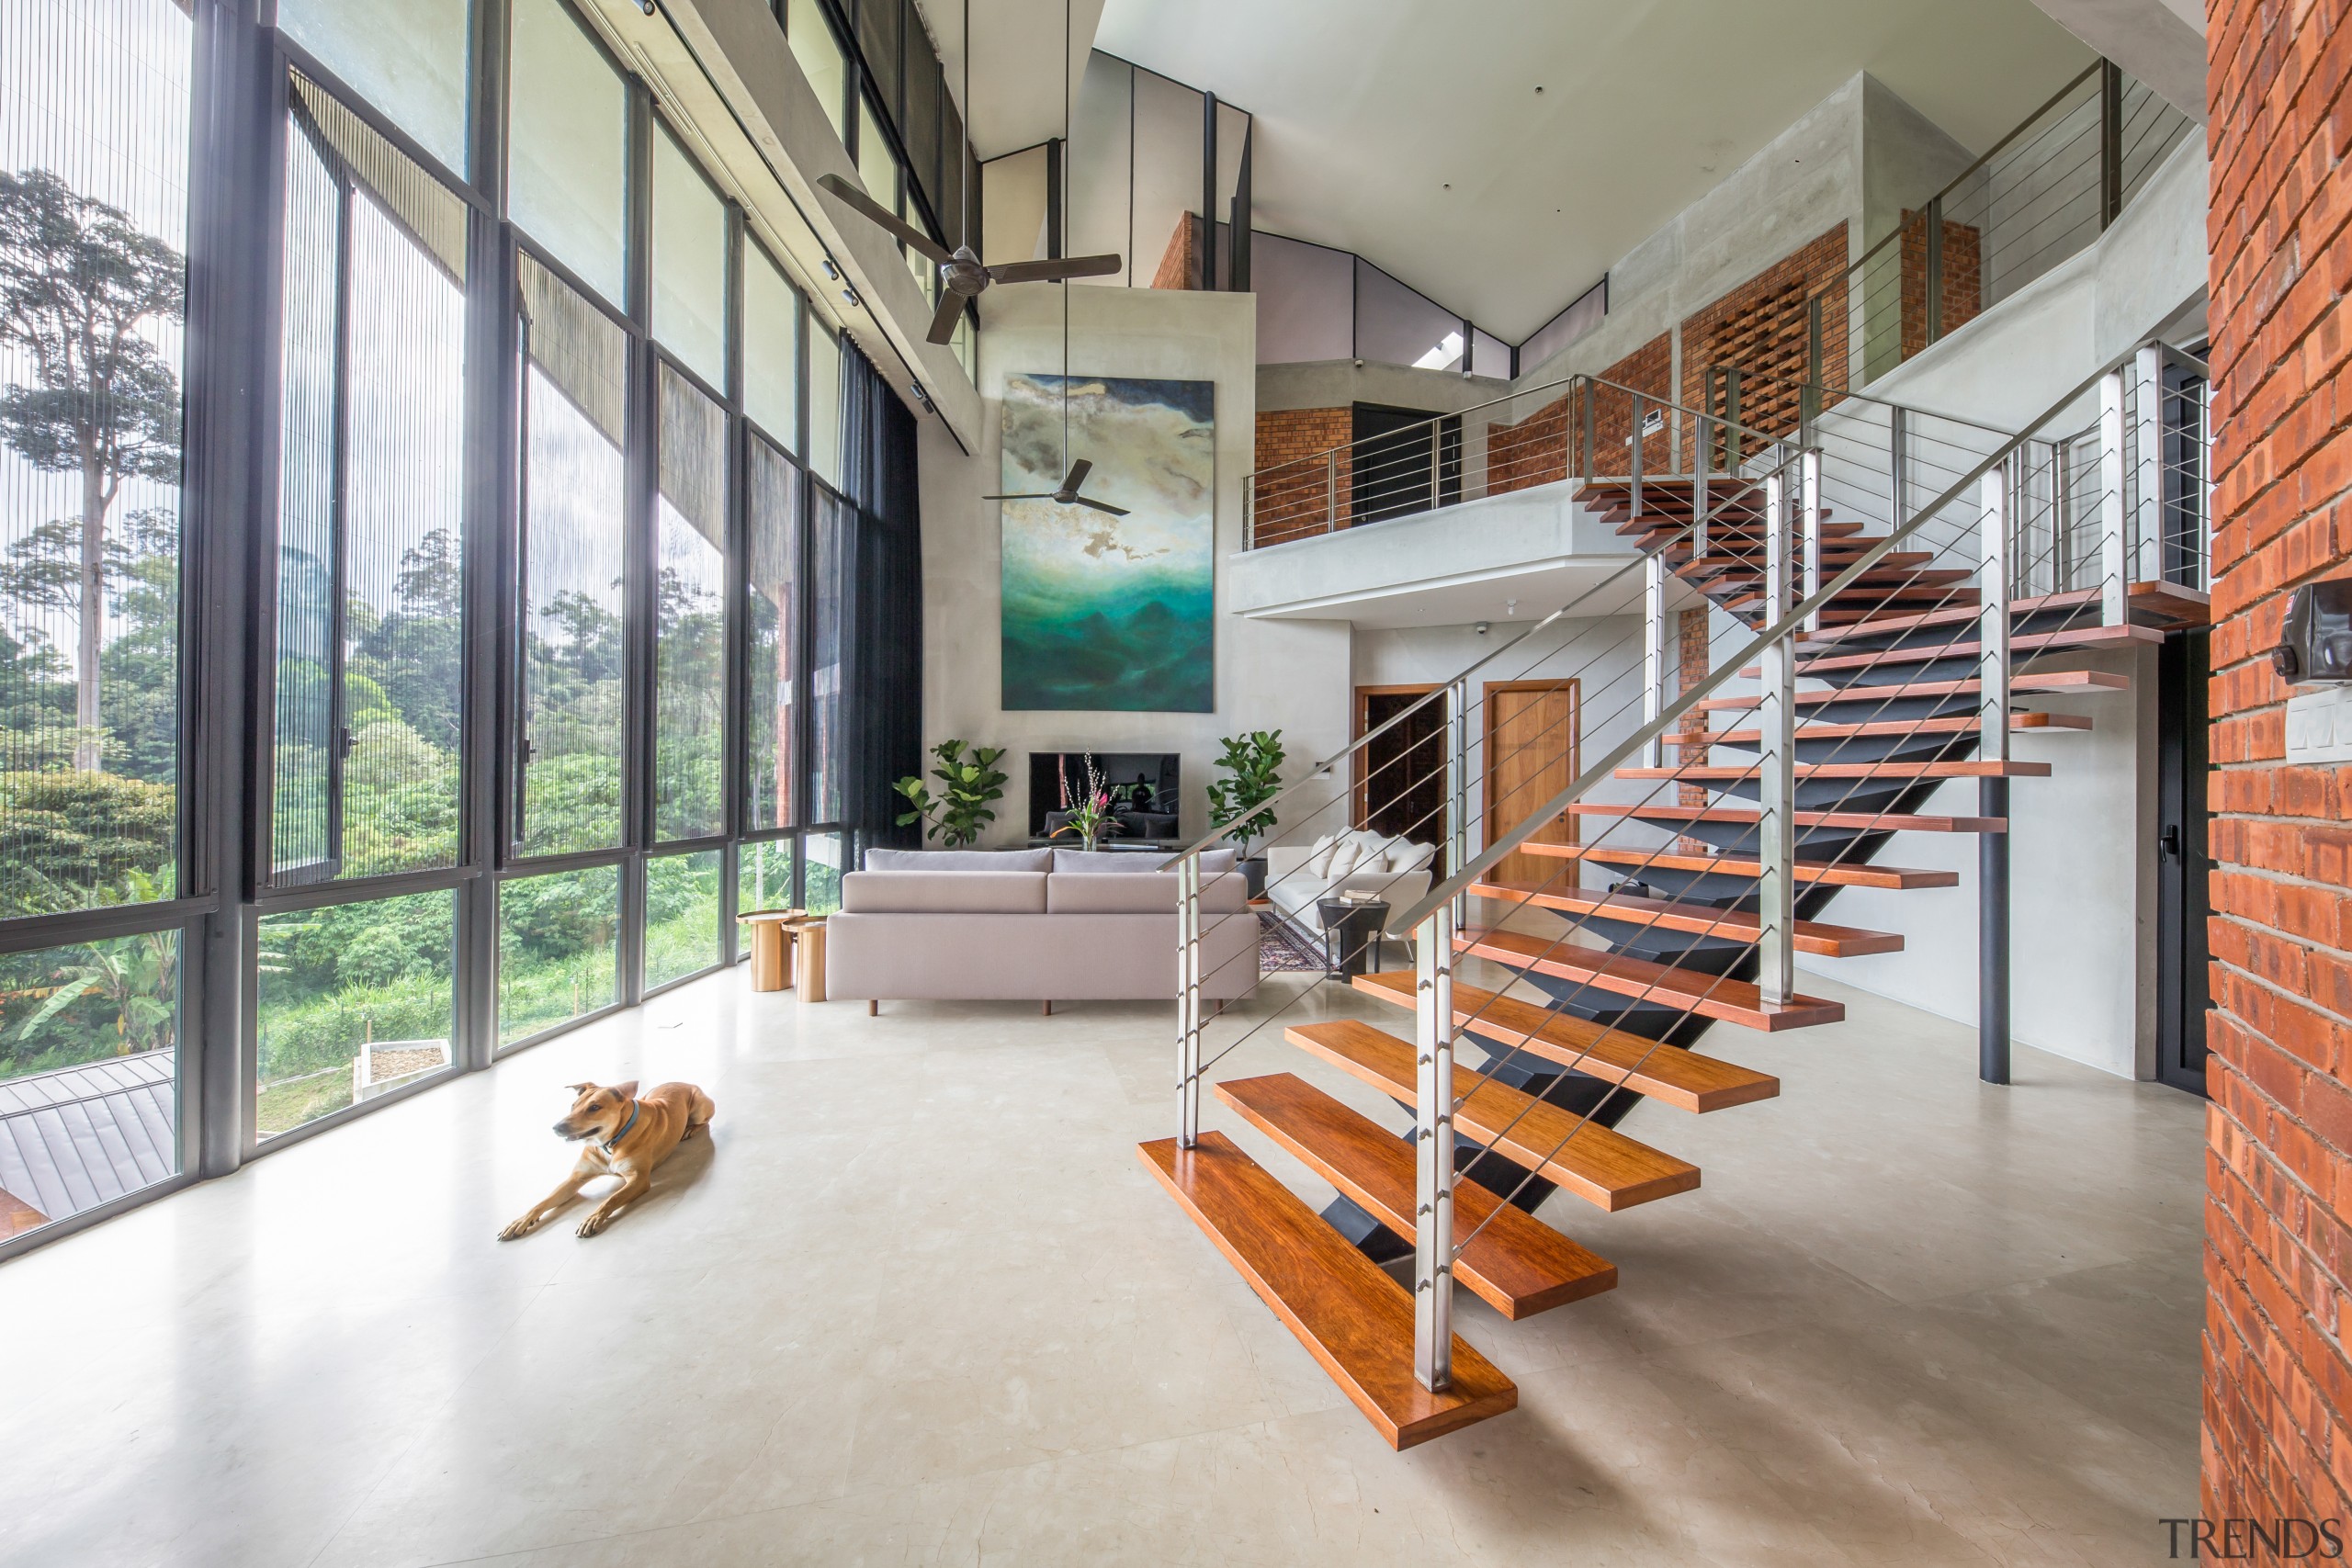 The living room combines a soaring ceiling with architecture, building, daylighting, floor, flooring, handrail, home, house, interior design, loft, property, real estate, residential area, room, stairs, wood, gray, white